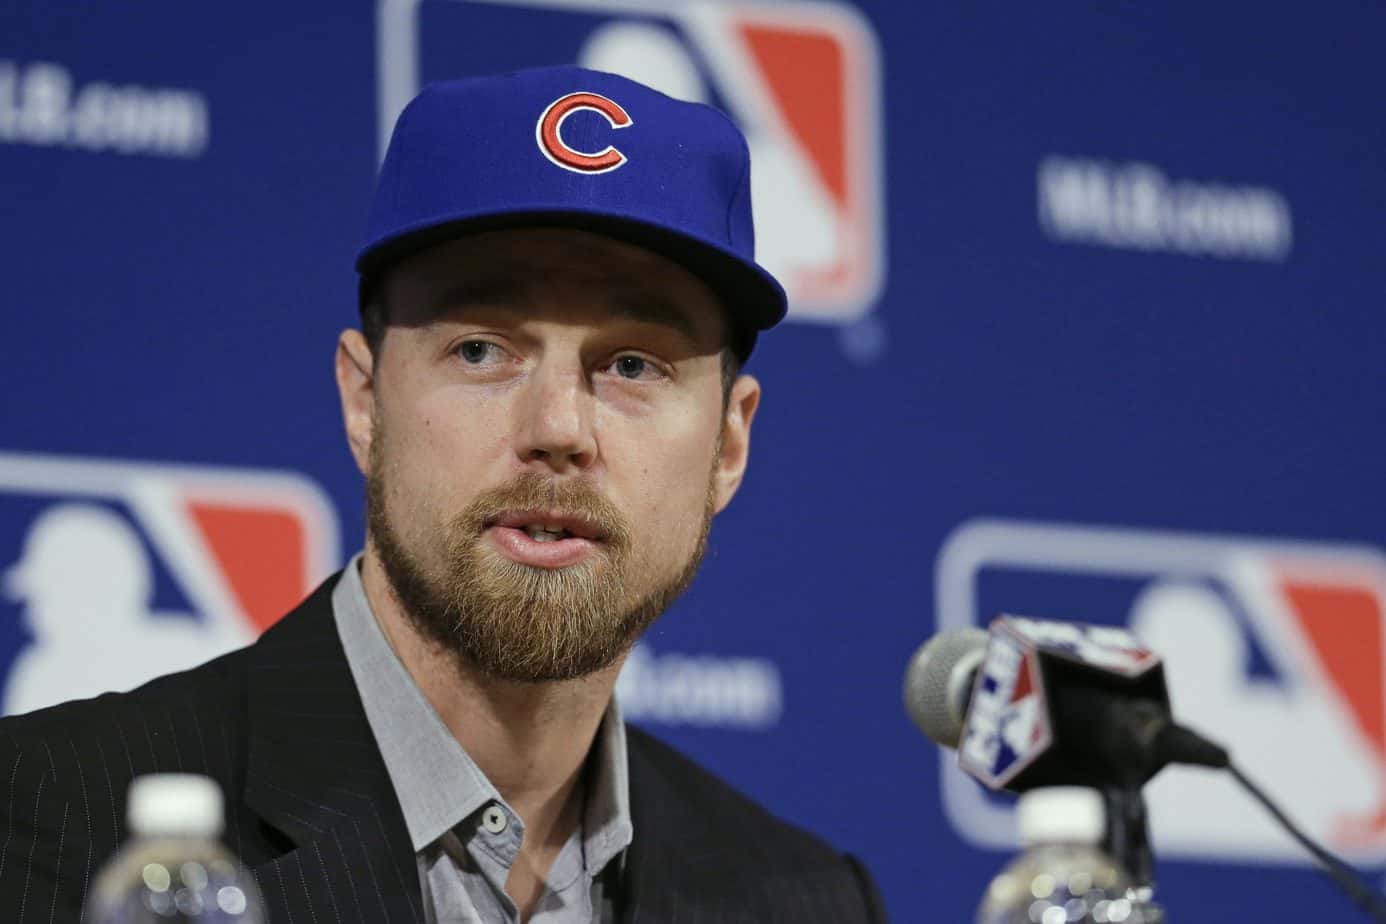 According to a report, former MLB star Ben Zobrist has dropped his lawsuit against the family pastor, Byron Yawn, who allegedly slept with his wife